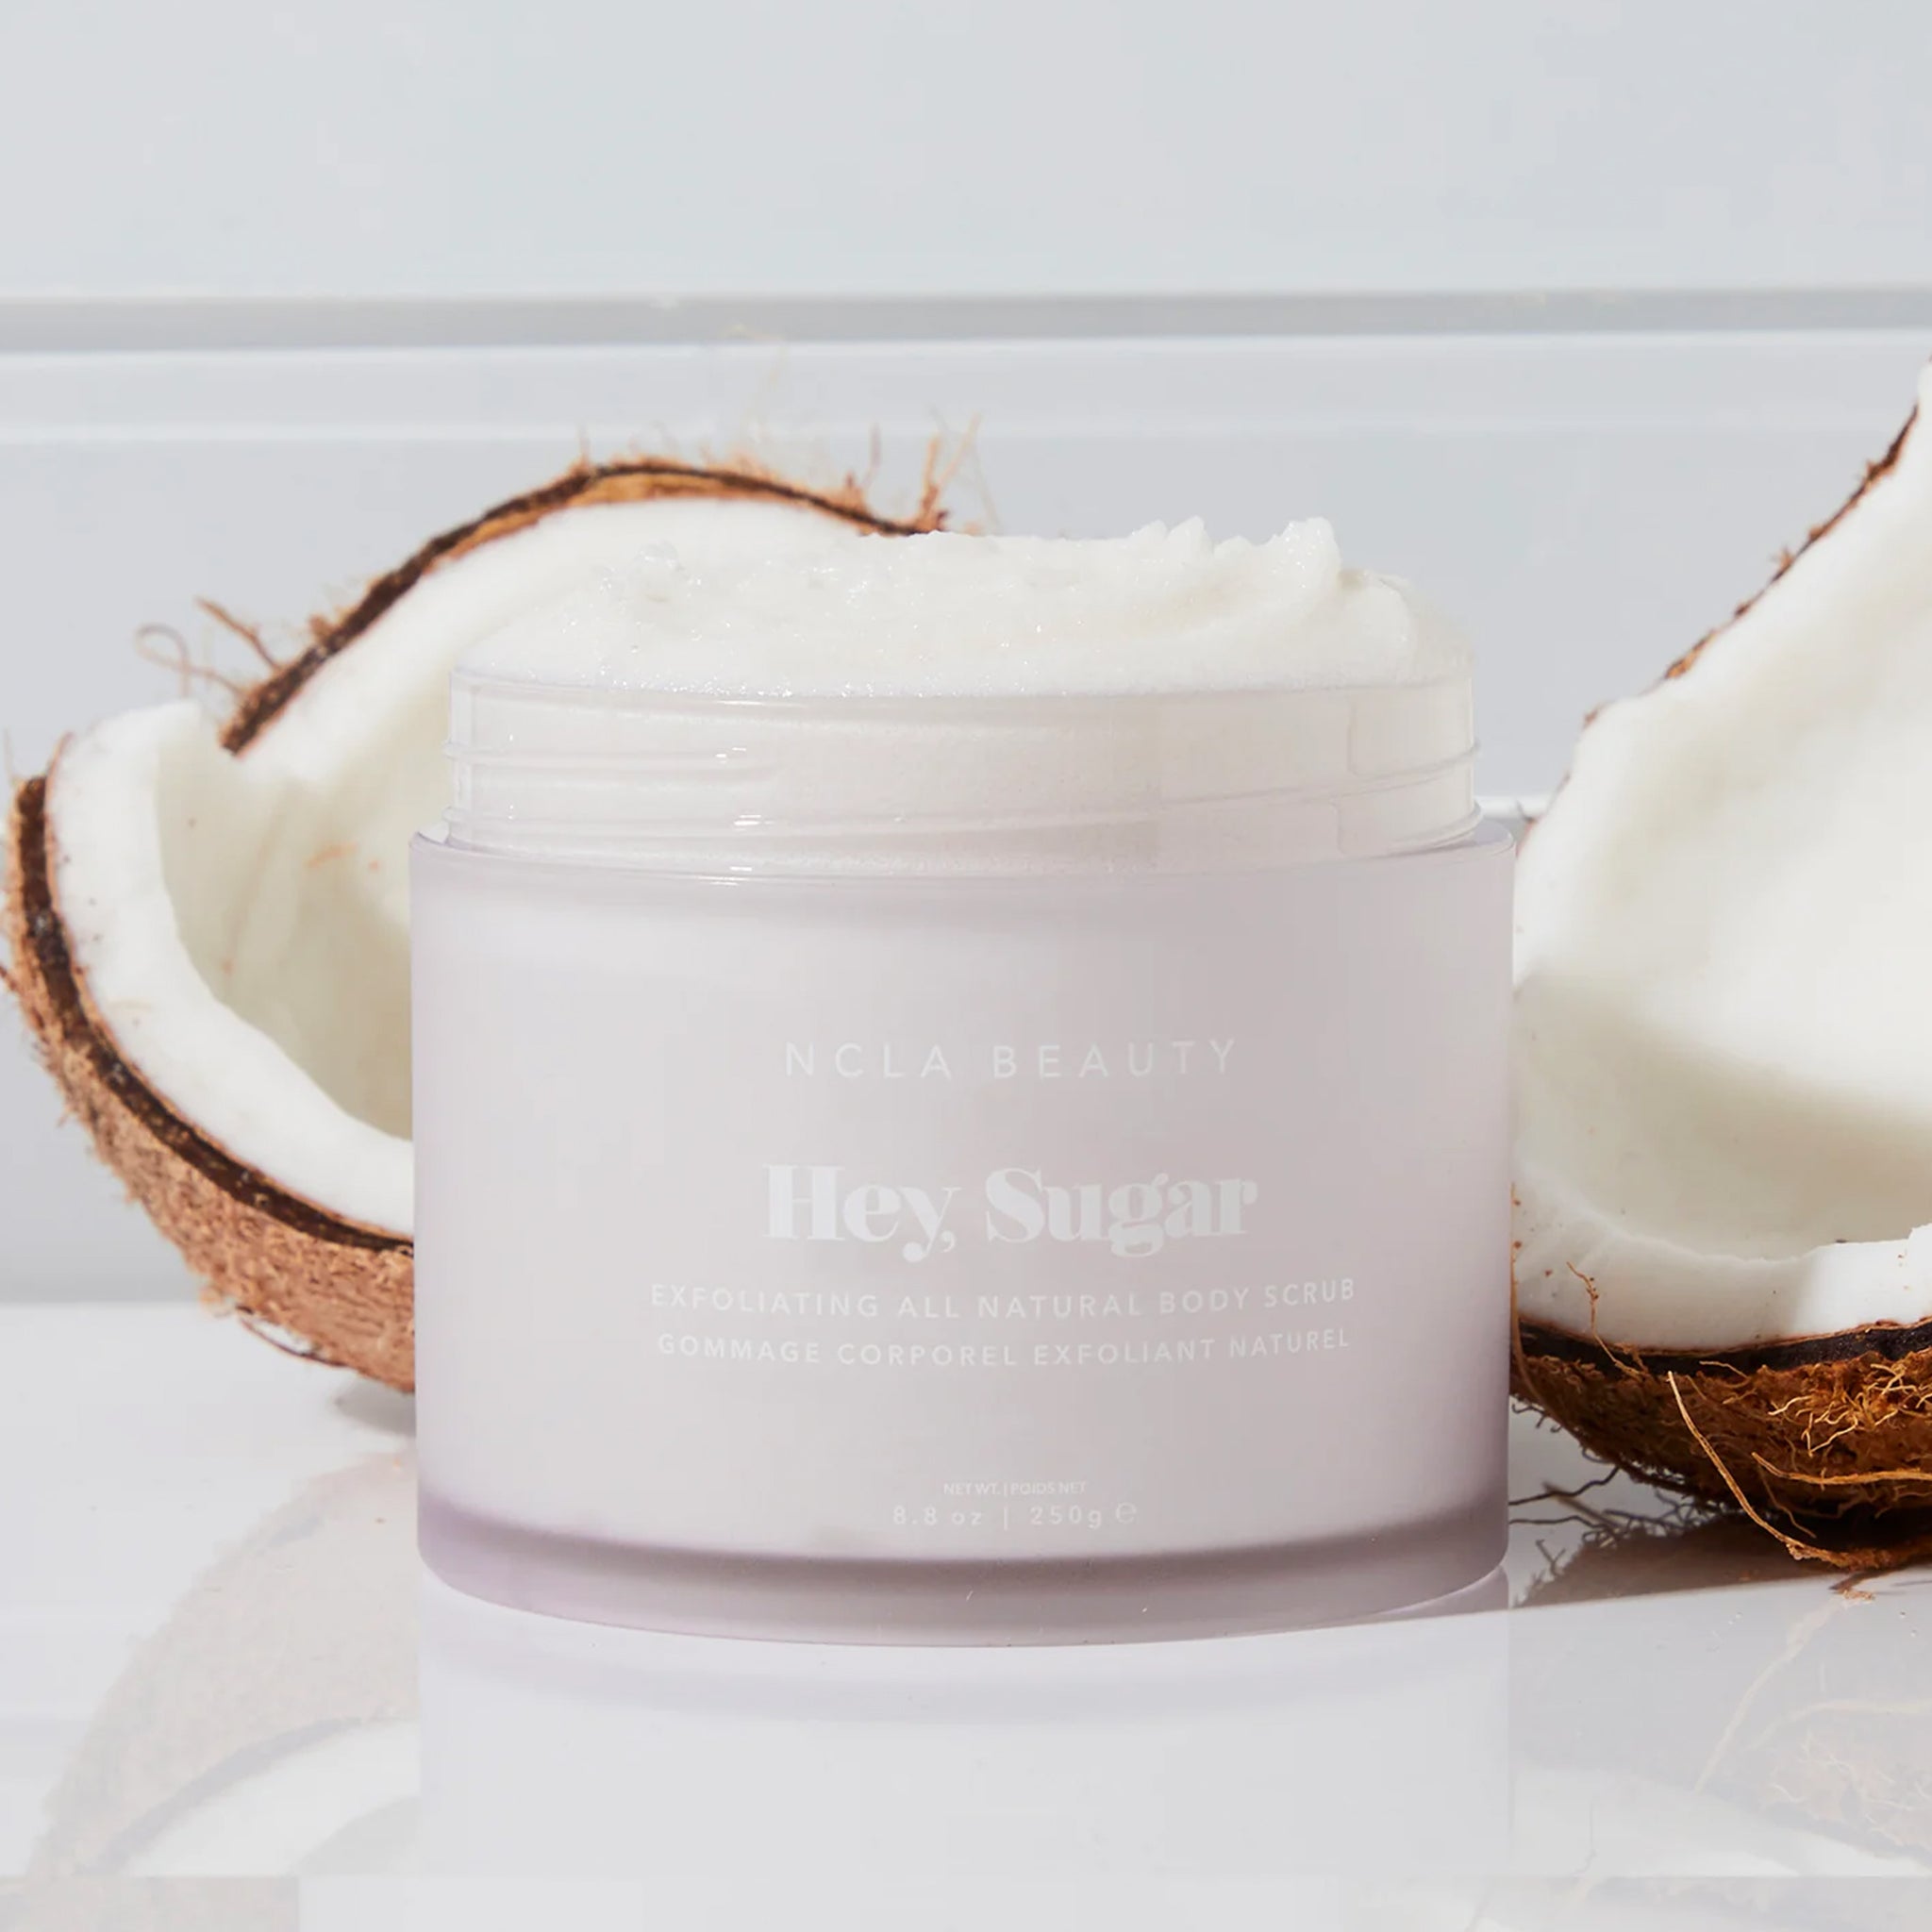 On a tiled  background is a container of white colored body scrub with text on the front that reads, "Hey, Sugar".